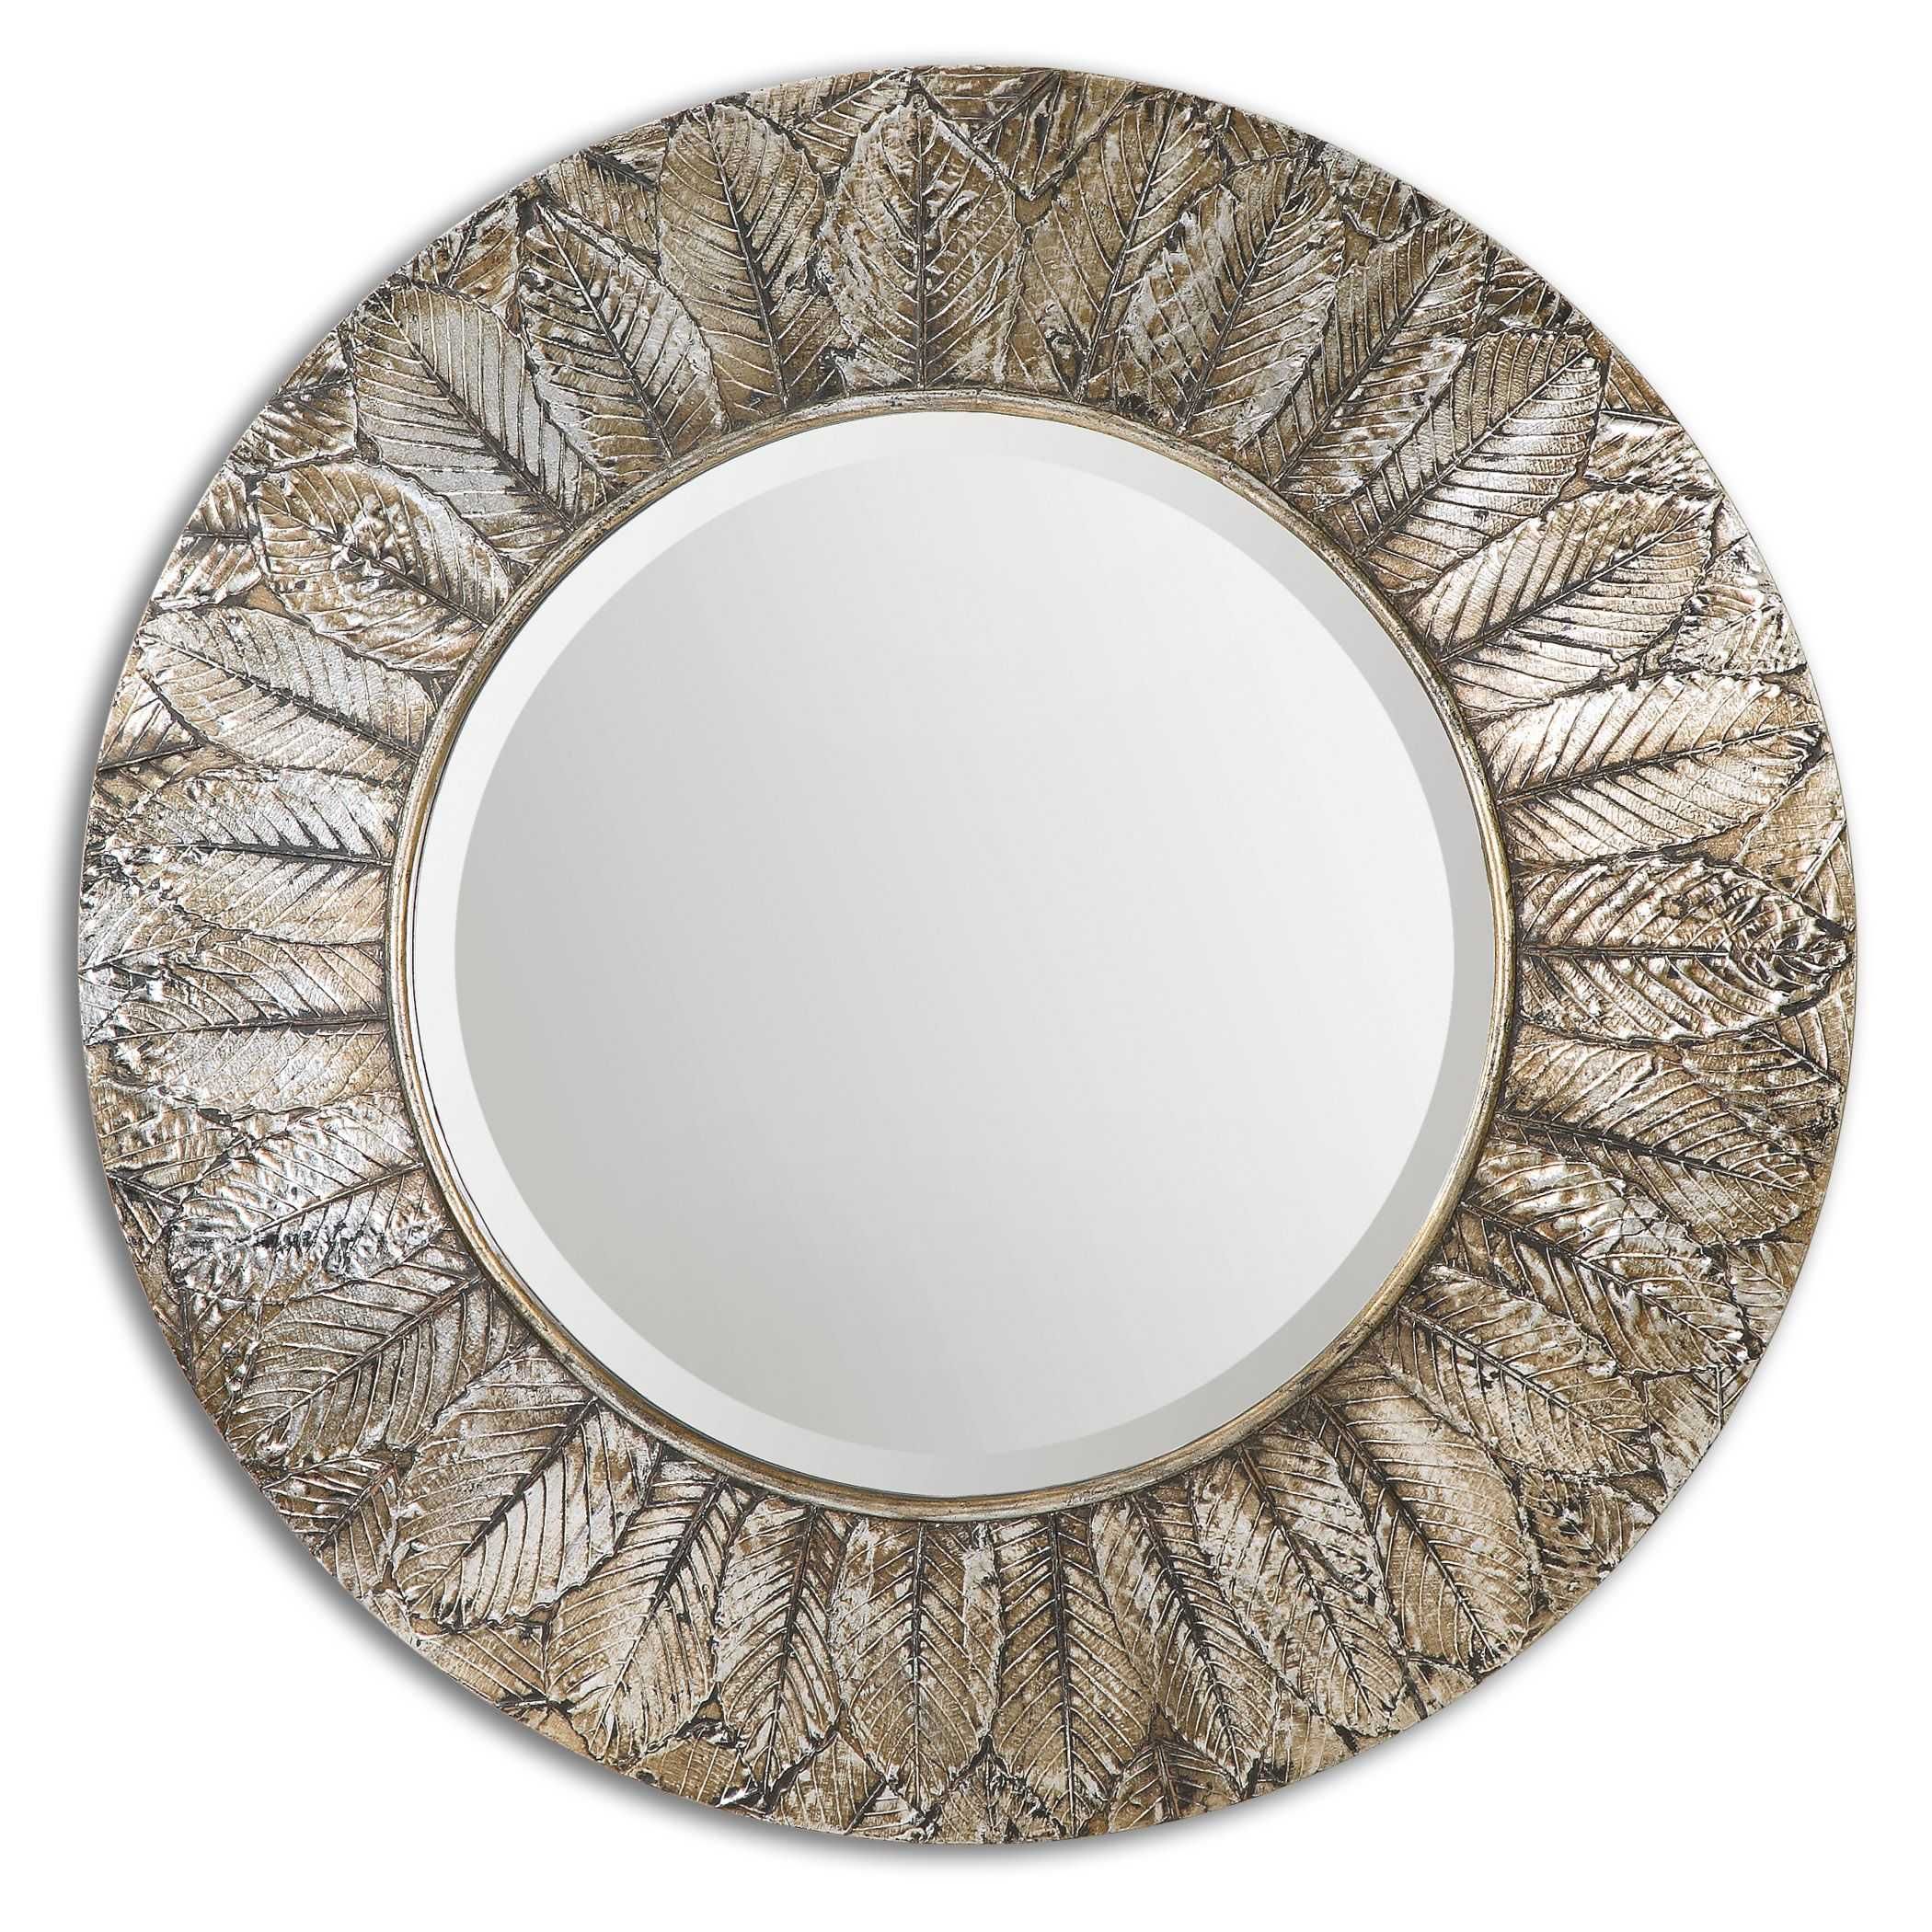 Uttermost Foliage Round Silver Leaf Mirror Within Silver Leaf Round Wall Mirrors (View 5 of 15)